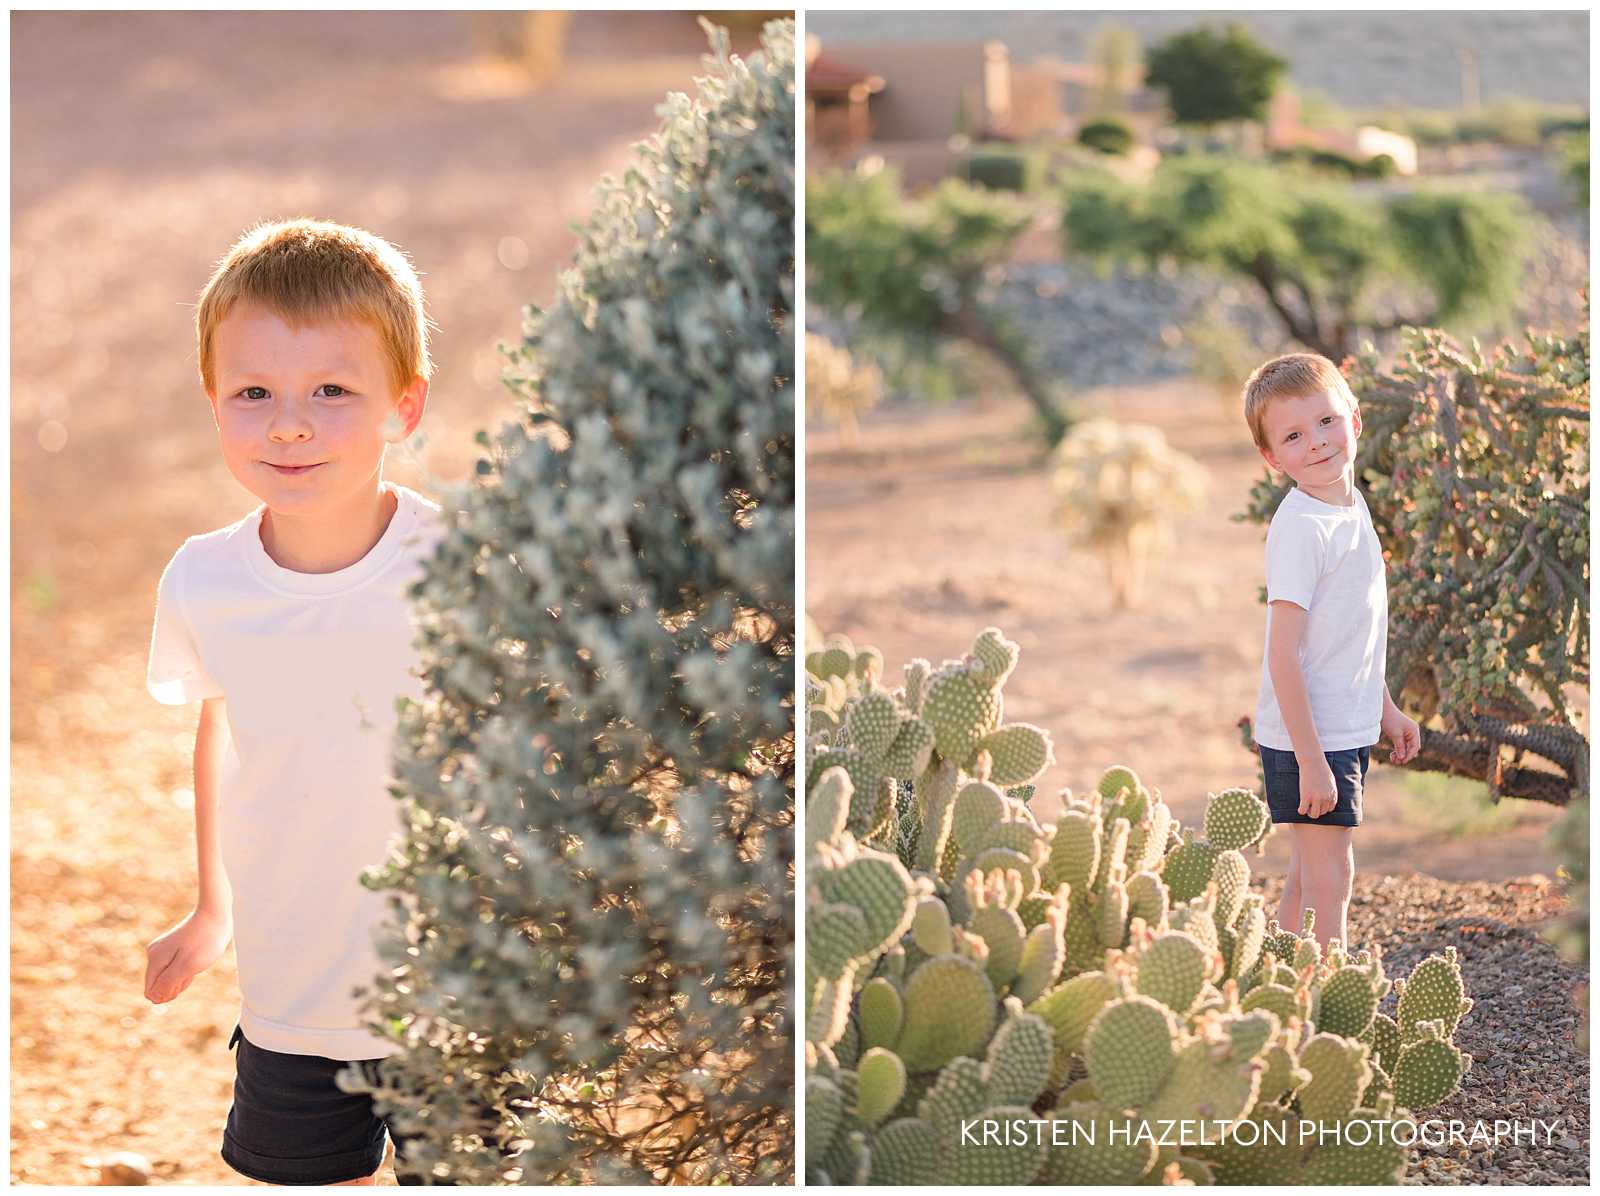 Golden hour portraits of a young boy in Tucson, AZ with cacti